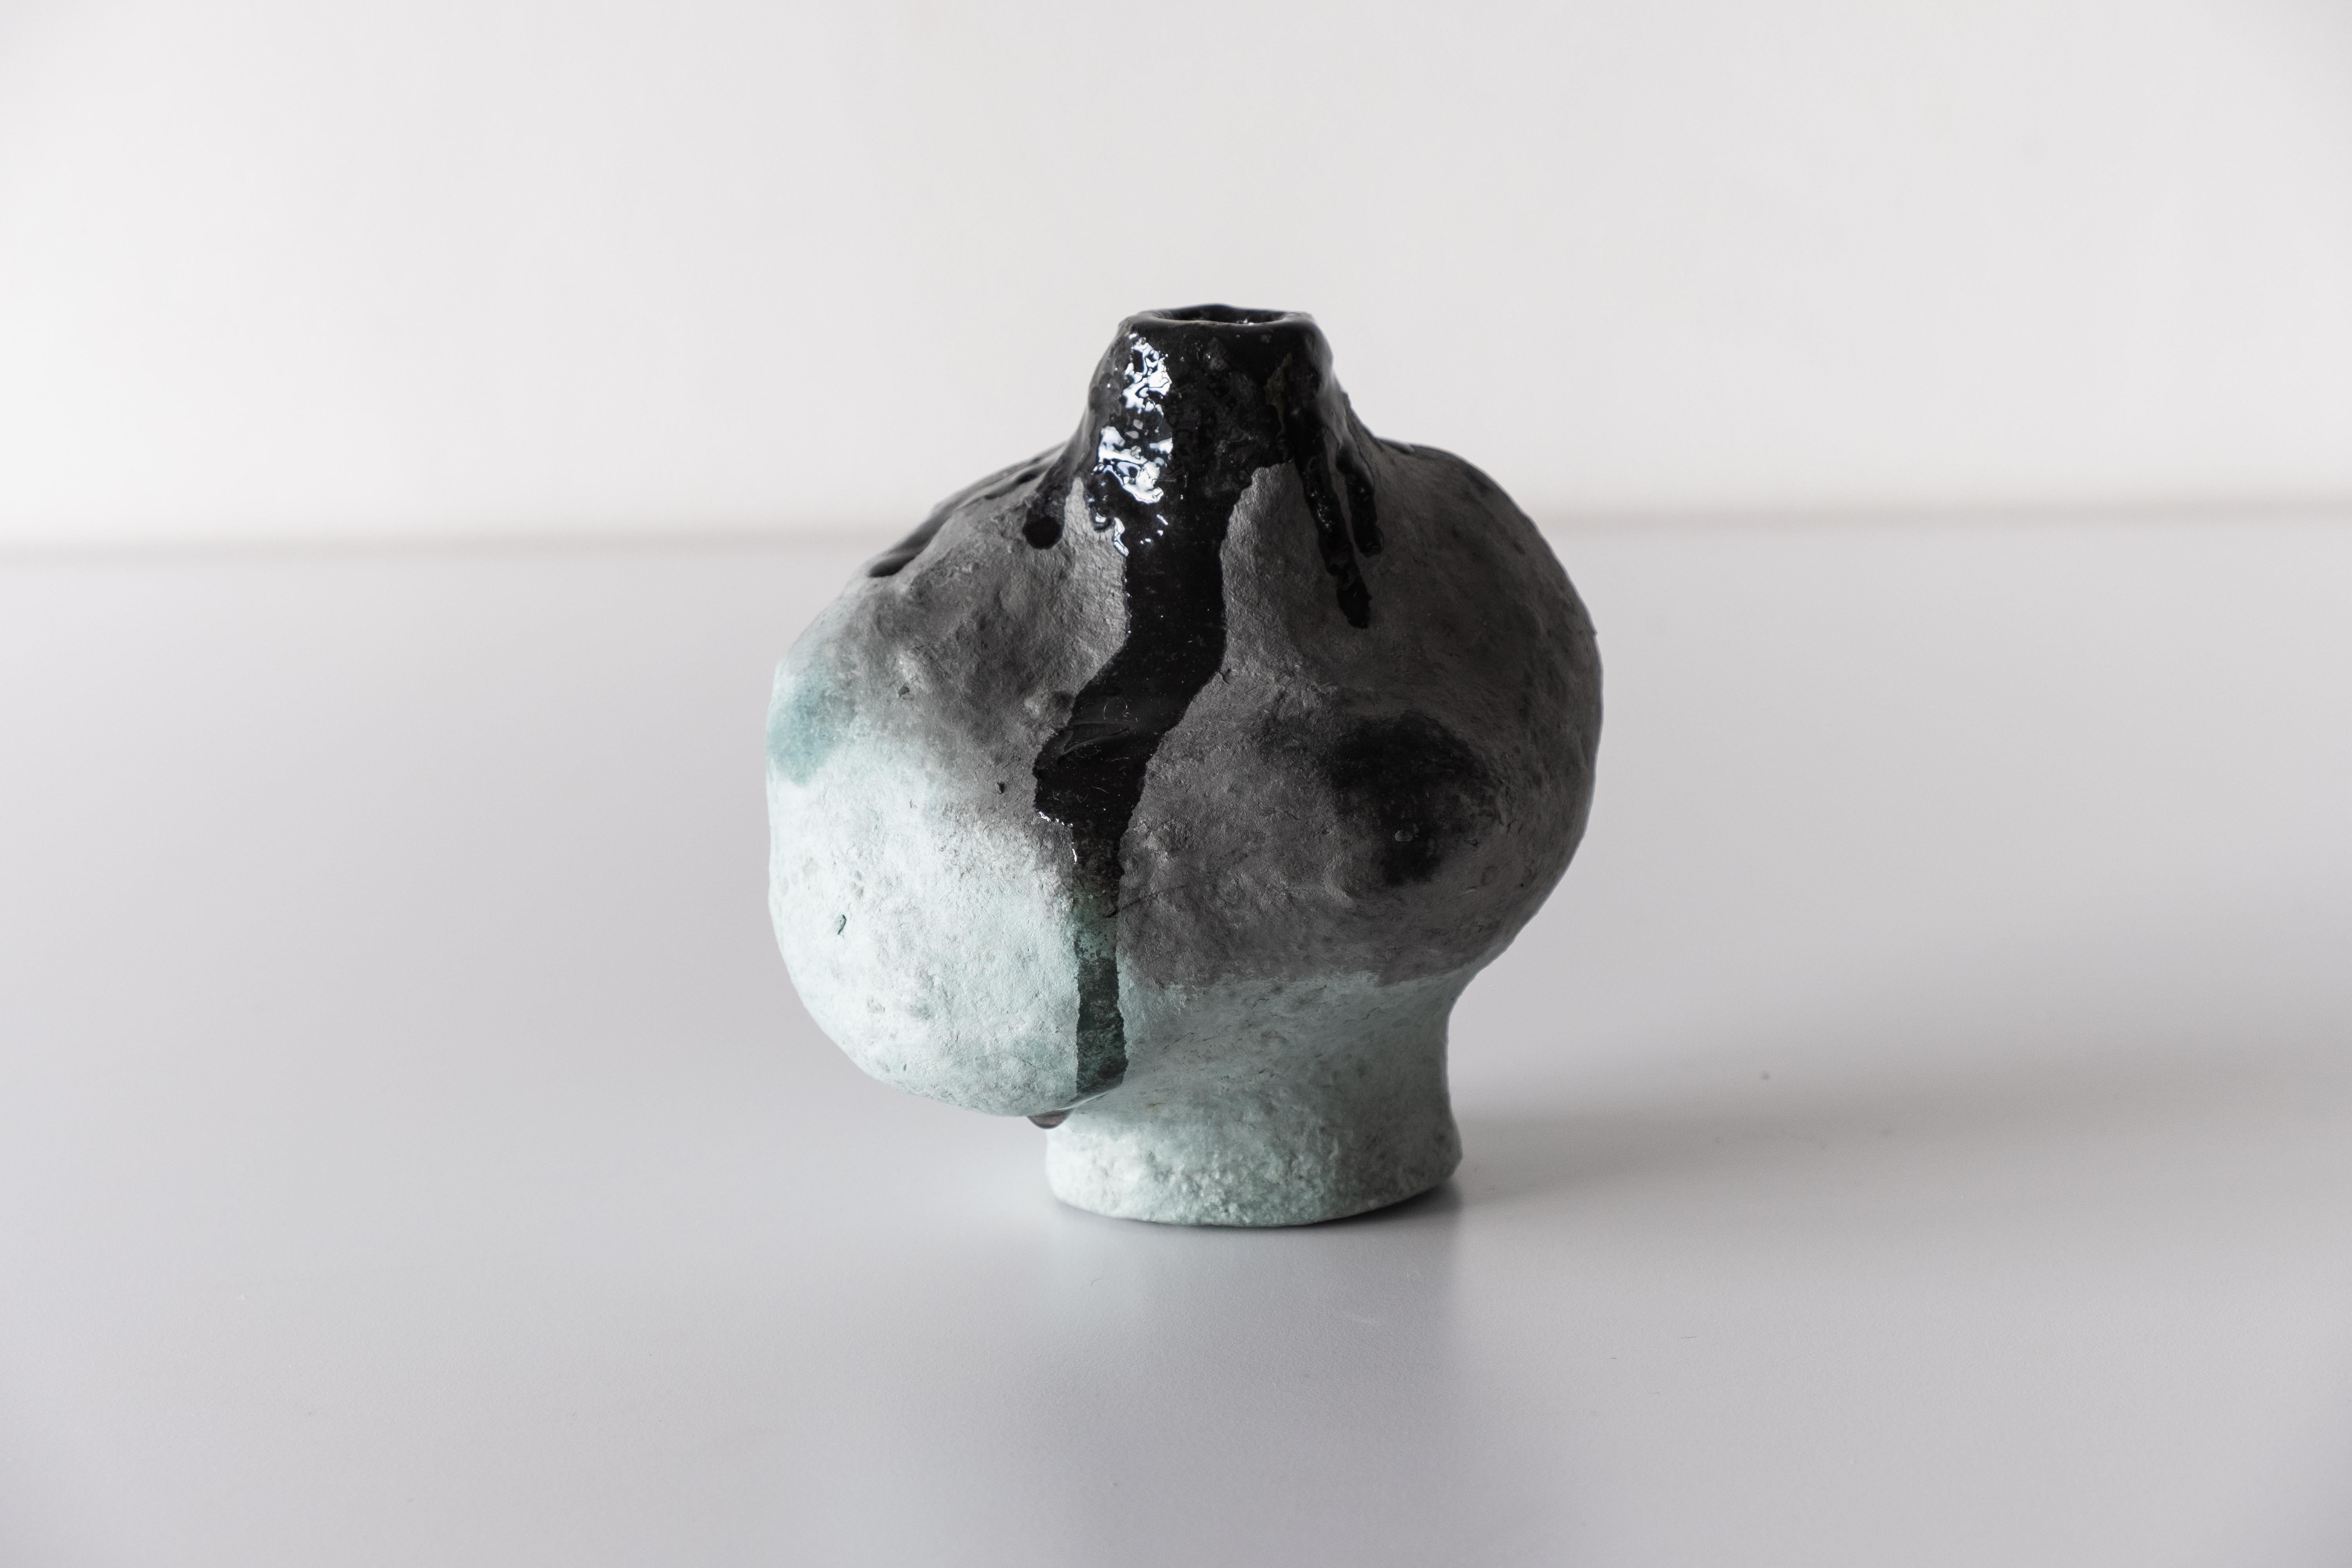 Barbican vase No.4 by A Space
Dimensions: D 12,7 x W 15,24 x H 12,7cm
Materials: Misc recycled.

The design duo conceived the Barbican Collection over the spring/summer of 2020 while on lockdown at the eponymous London architectural and cultural